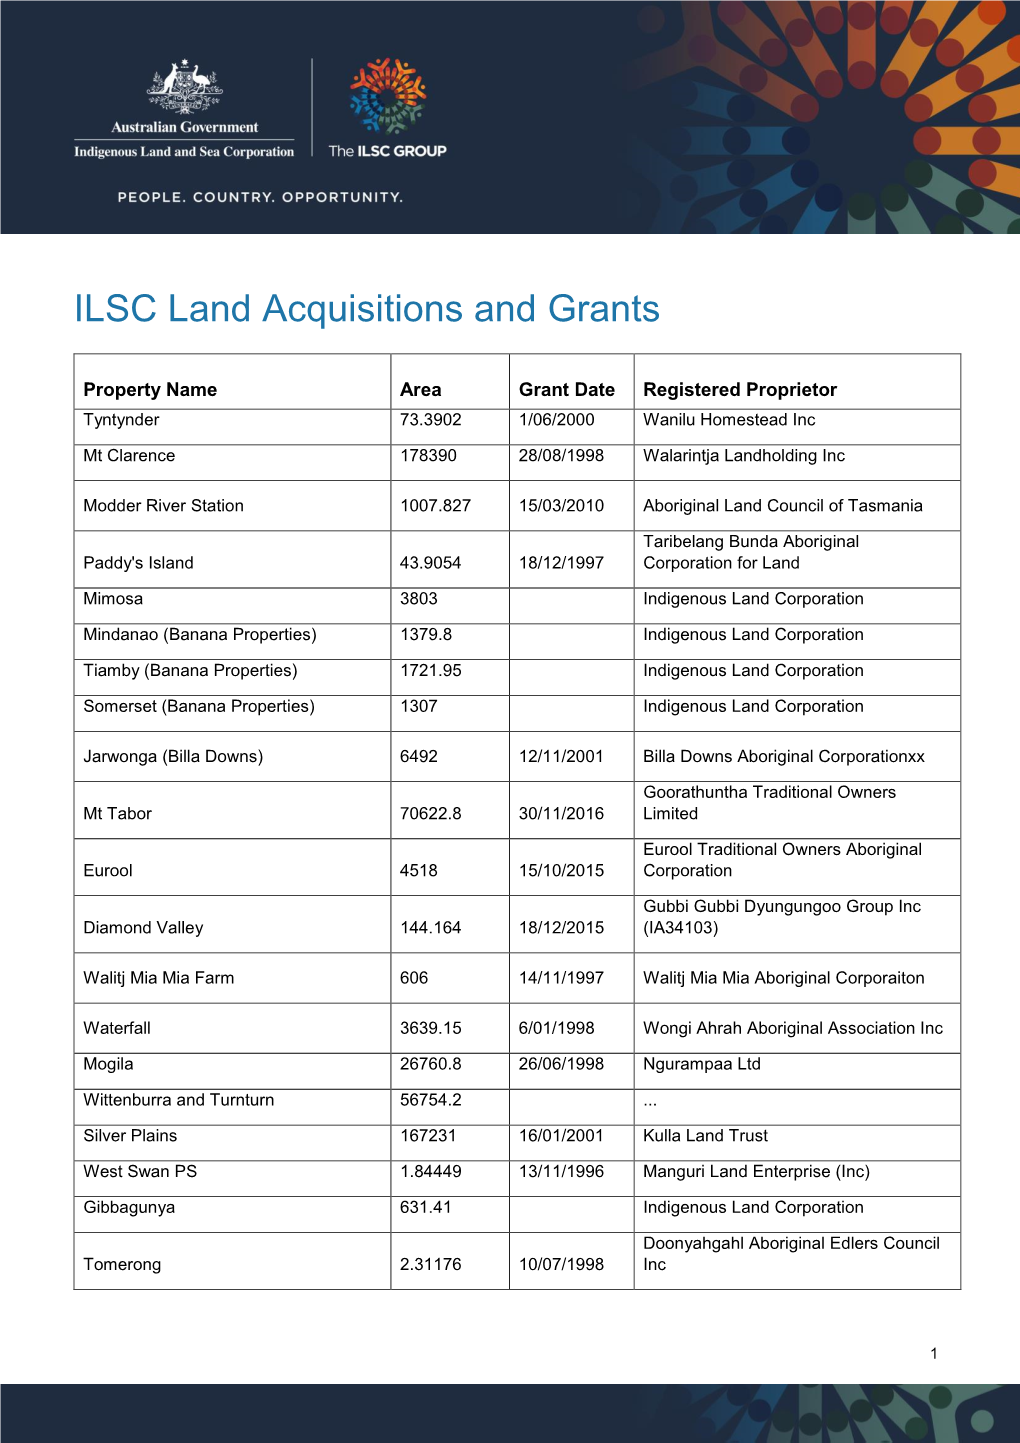 ILSC Land Acquisitions and Grants